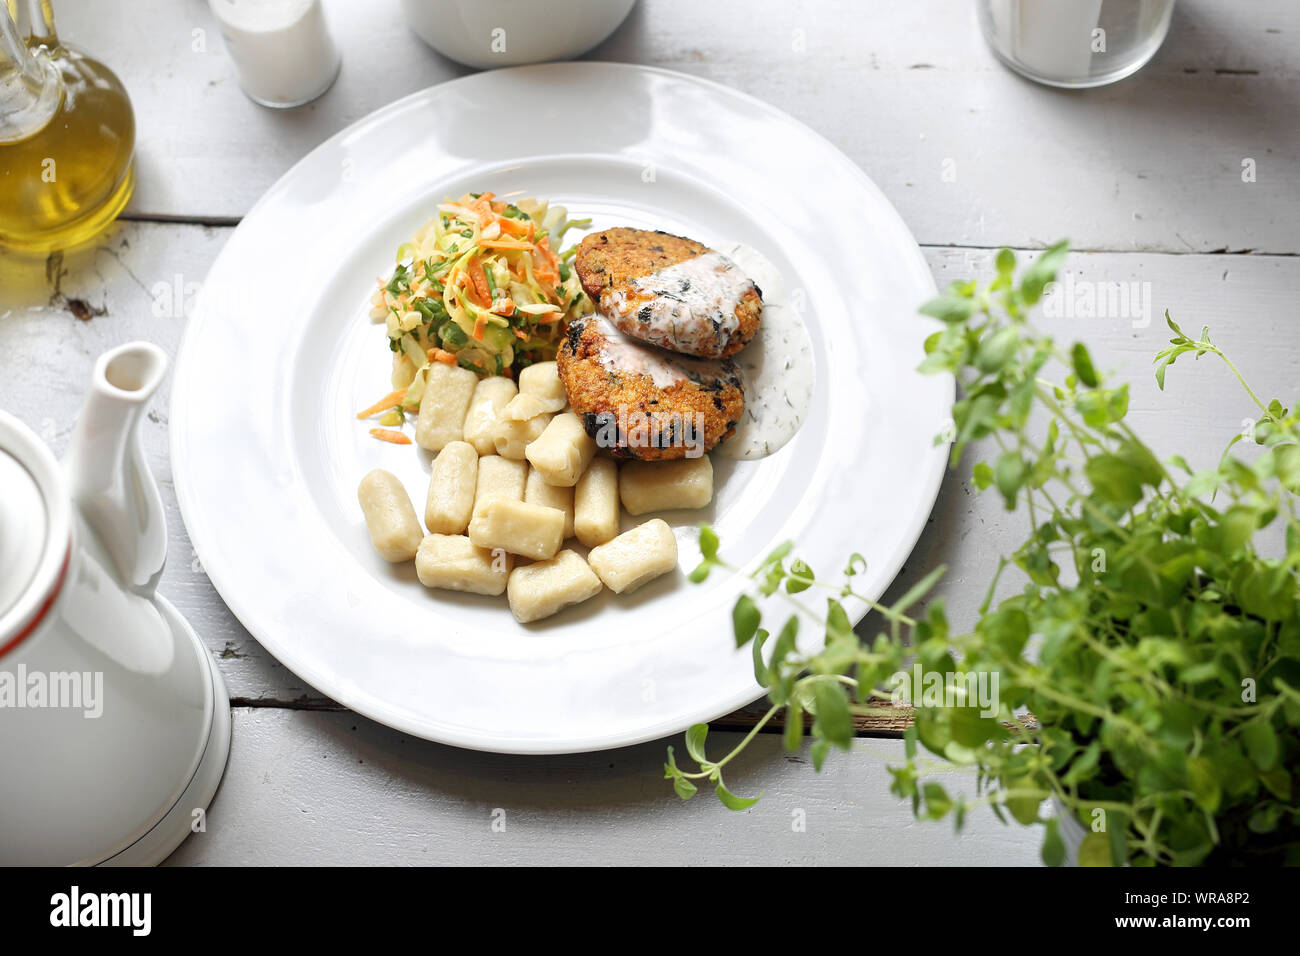 Vegetarian lunch, healthy vegetable cutlet with dumplings and white cabbage salad. Stock Photo